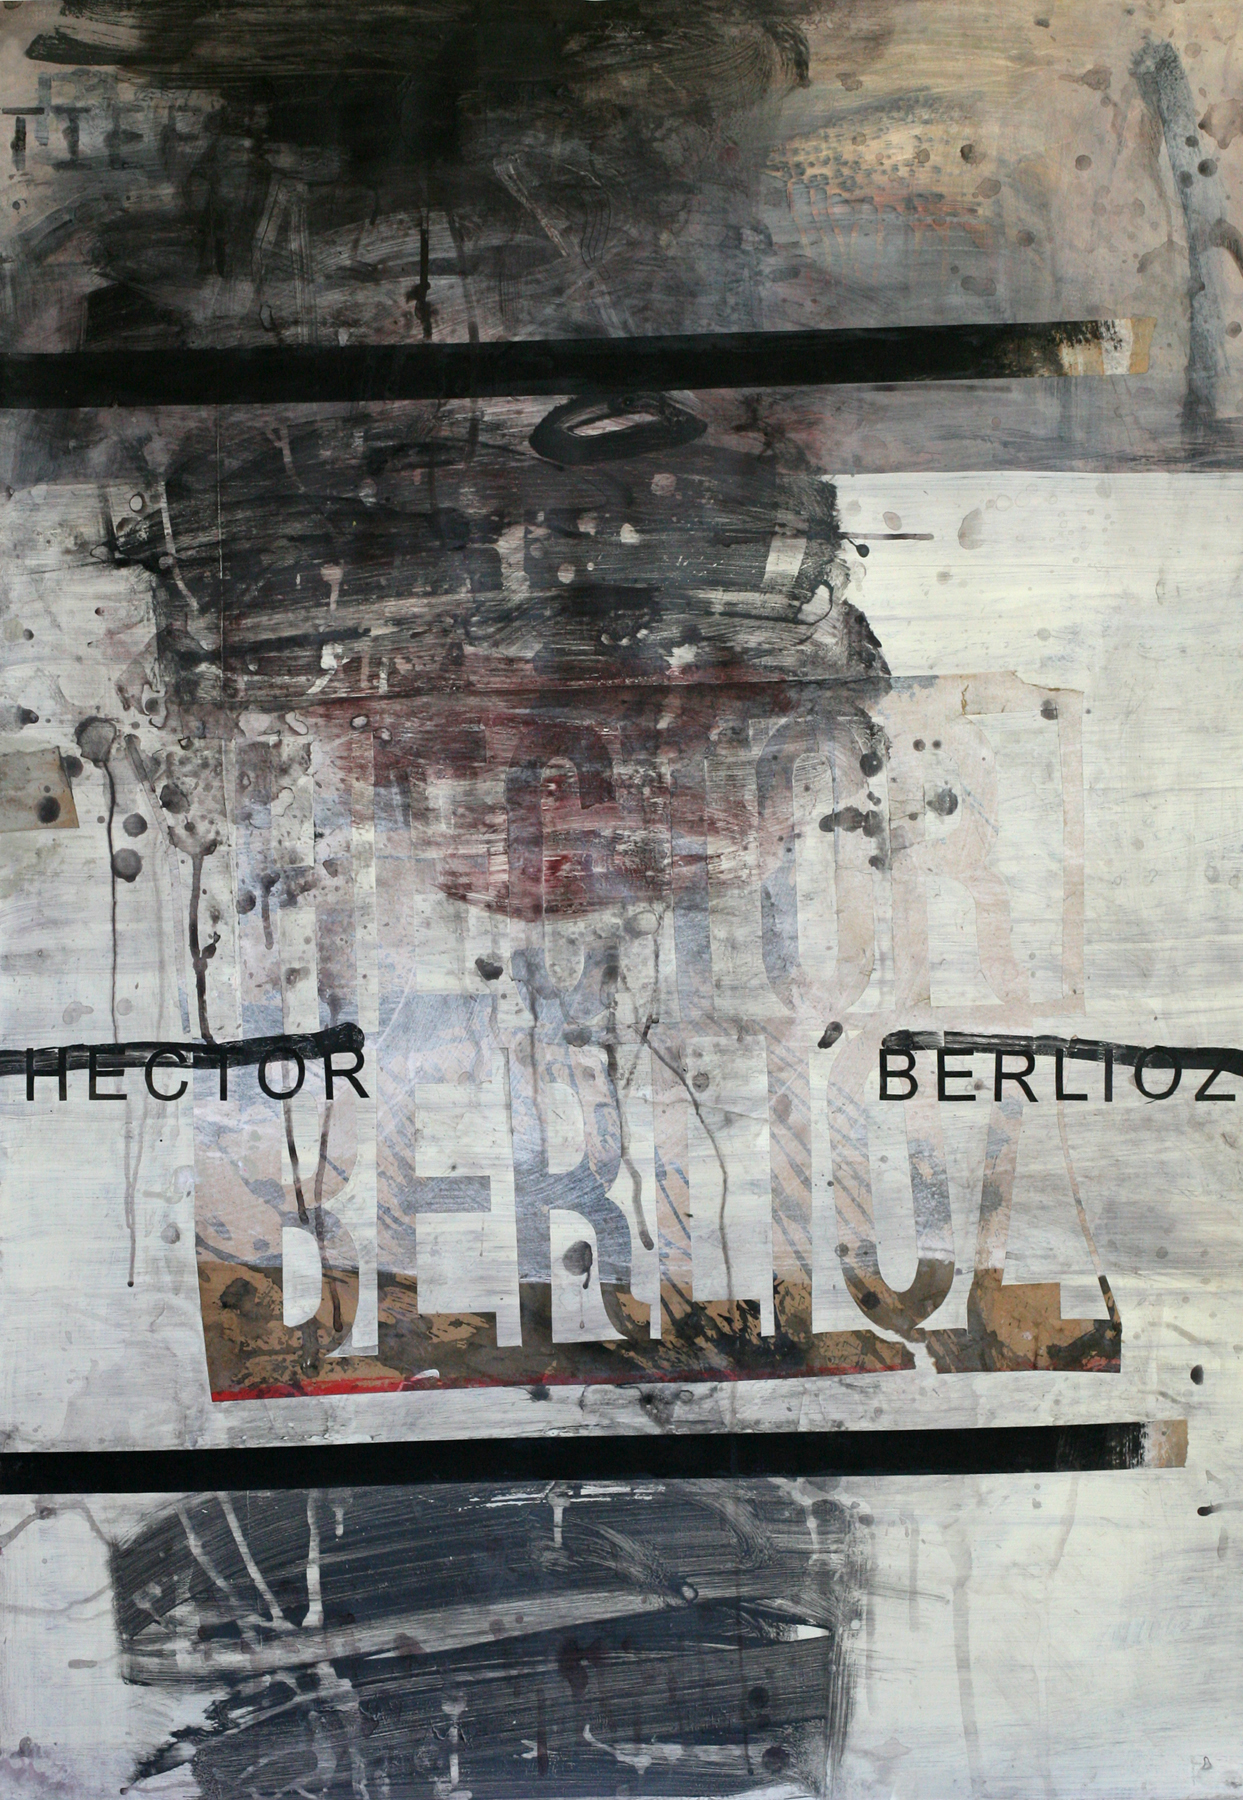 Hector Berlioz, acrylic and paste on paper on board, 48" x 34"